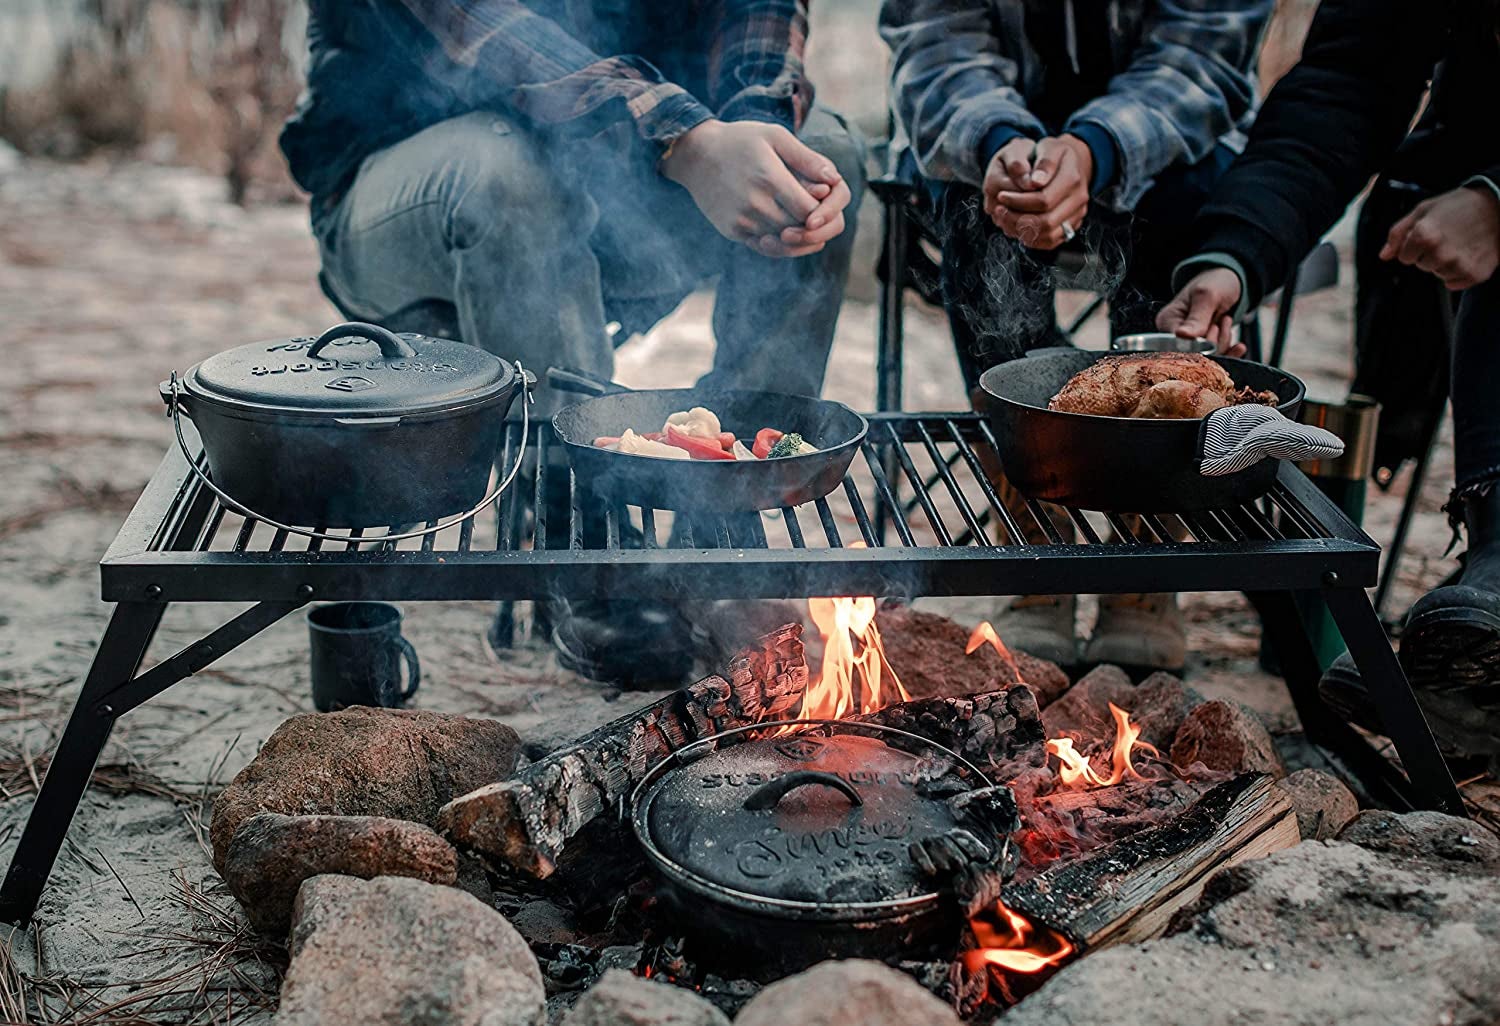 Campfire Cooking Kit: Make Your Own or Buy the Best